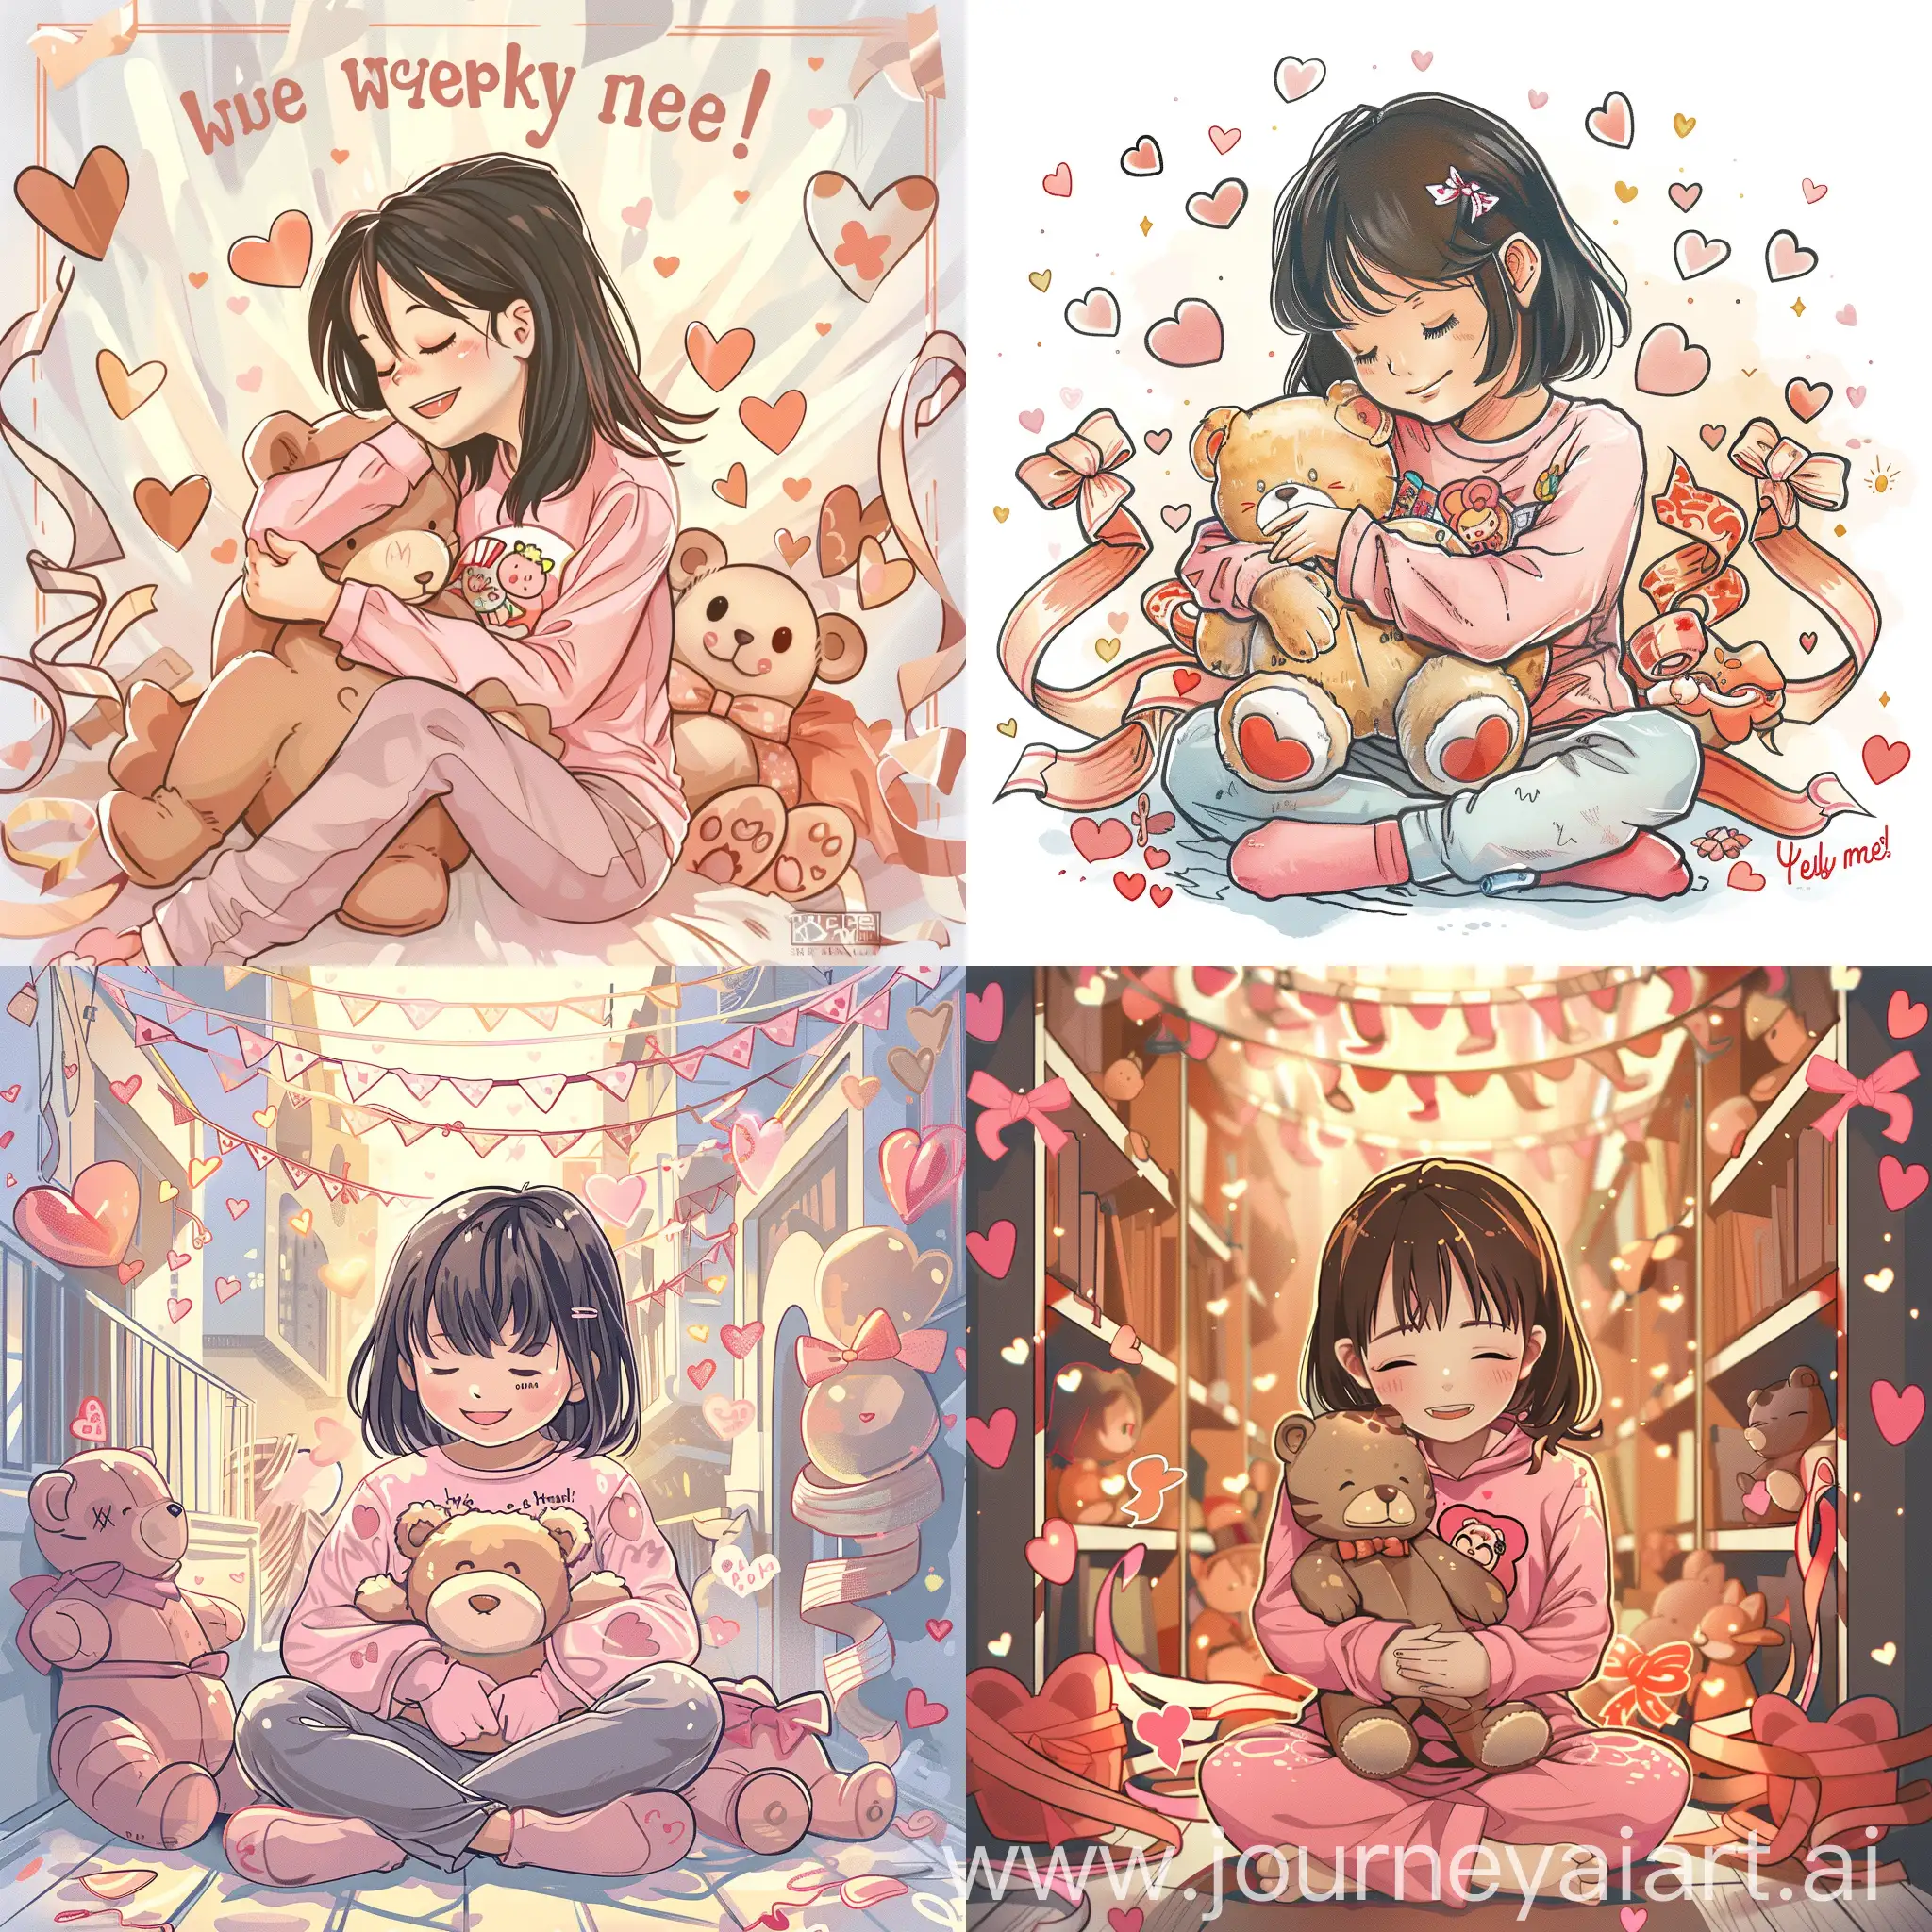 Generate an image featuring a child sitting in Tokyo, wearing a pink long-sleeve shirt with a cute character illustration on the chest, hugging a teddy bear. Surroundings decorated with hearts and ribbons. Include the text design "Stylish, sweet, perky & pretty, she's the cat's meow!".